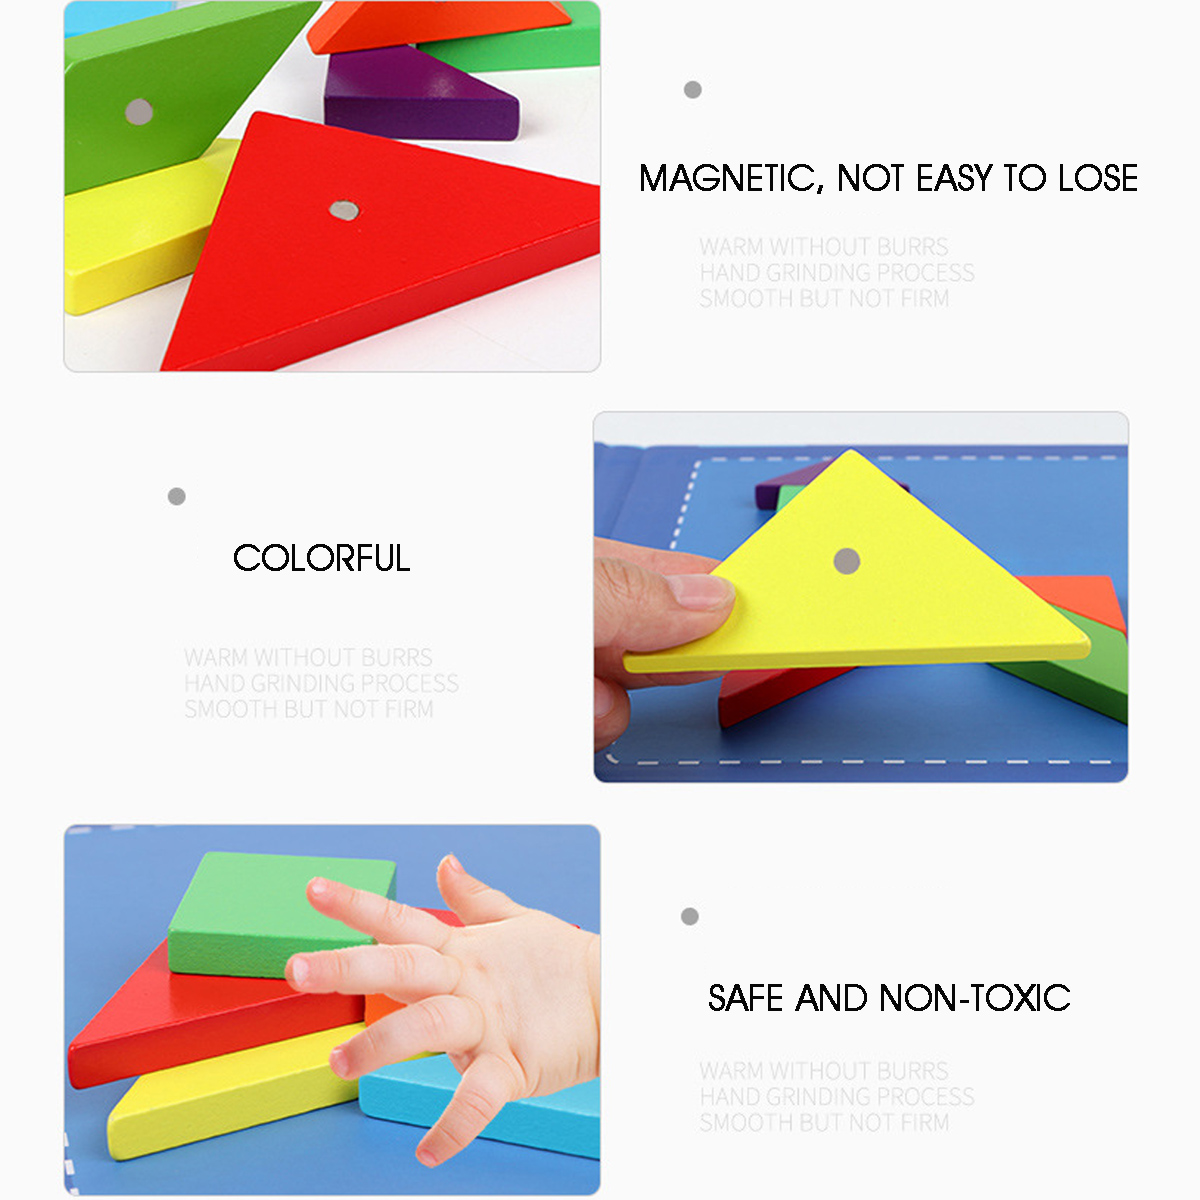 Kids-Child-Magnetic-Tangram-Jigsaw-Puzzle-Toy-Creative-Shape-DIY-Wooden-Puzzles-Montessori-1621514-6